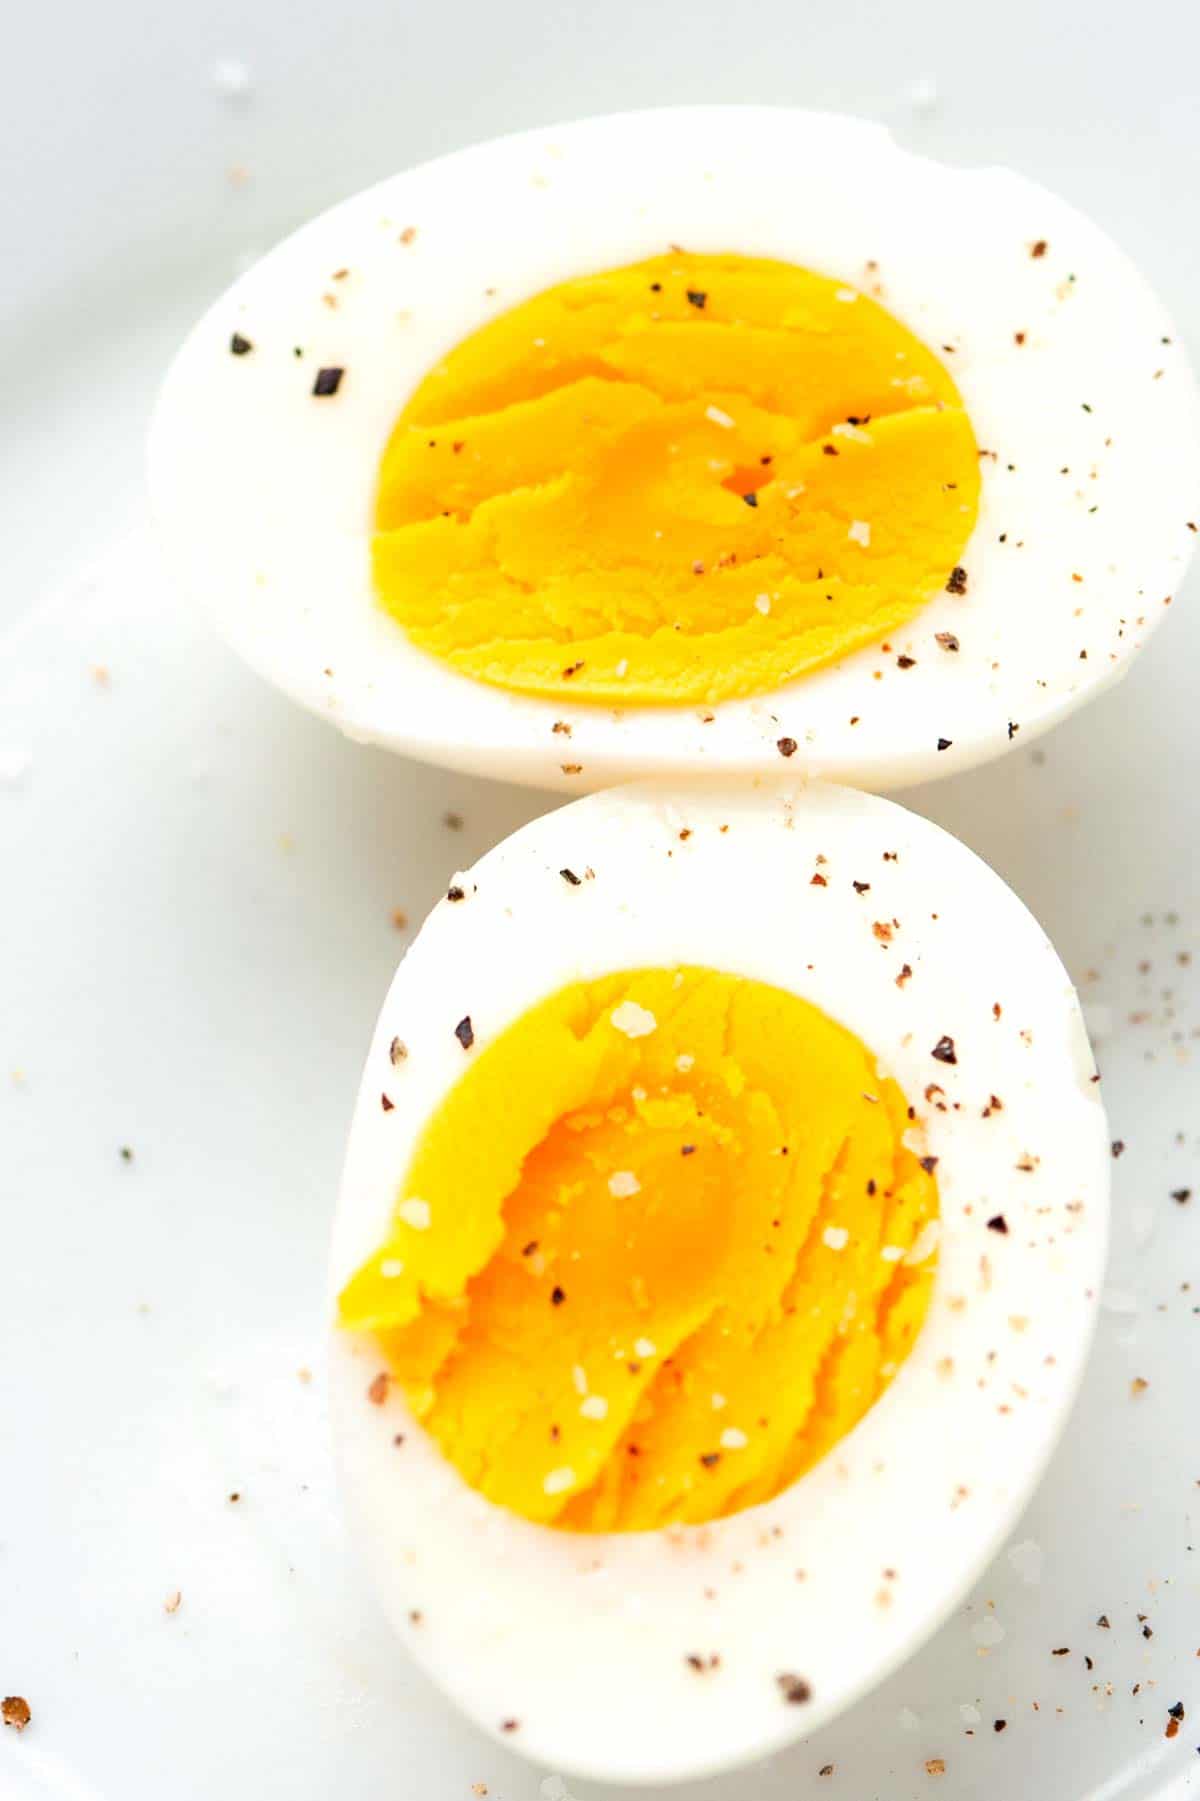 How to Make Hard Boiled Eggs Perfectly Every Time (Stovetop Method)